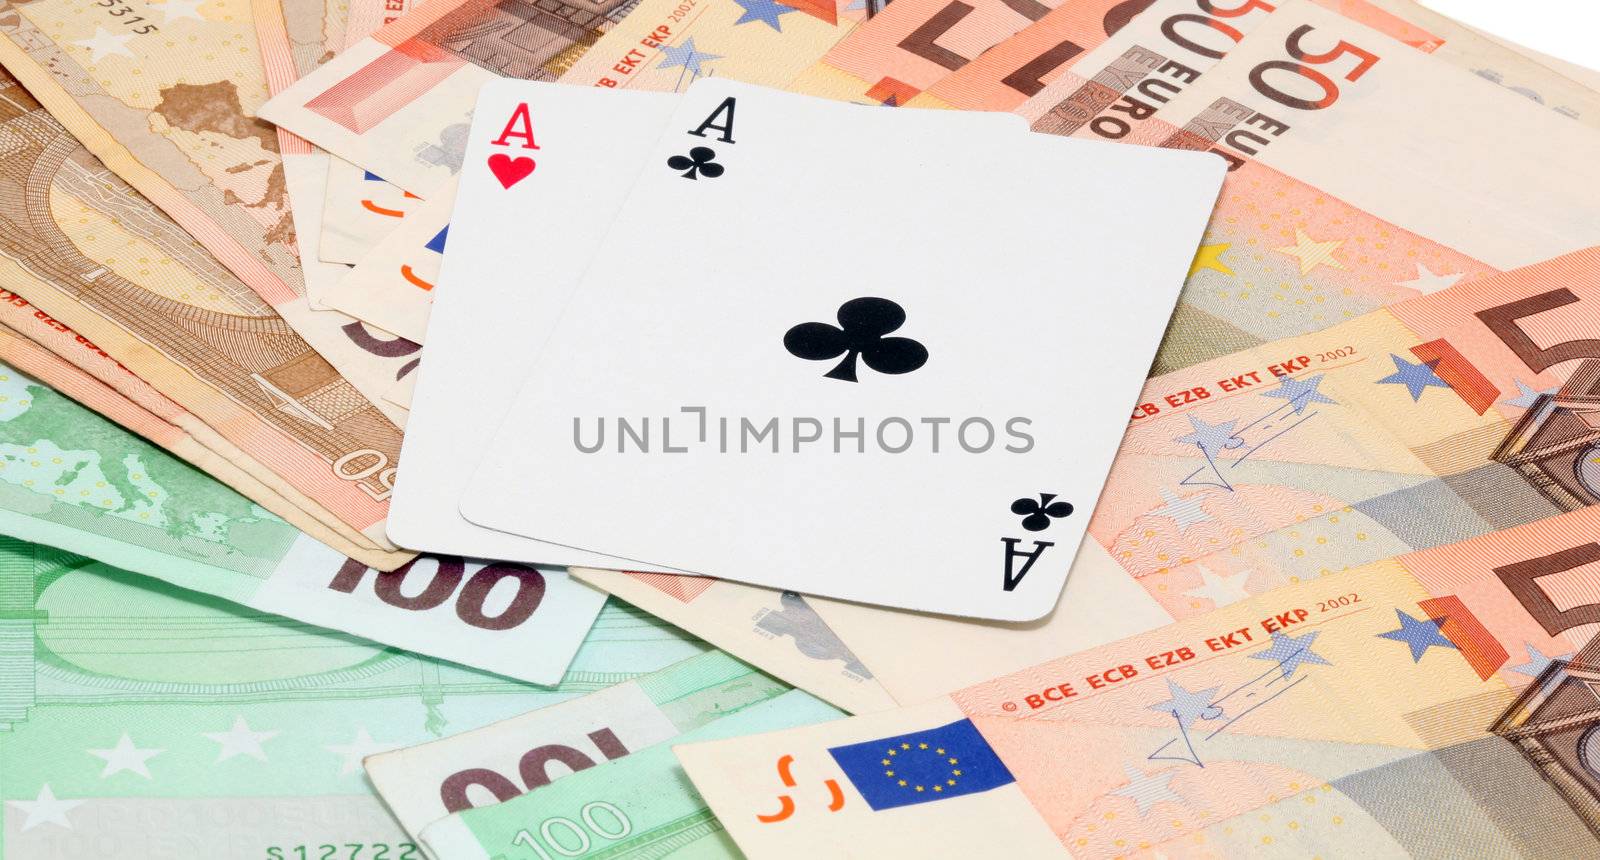 two aces gambling and money with euro banknotes background